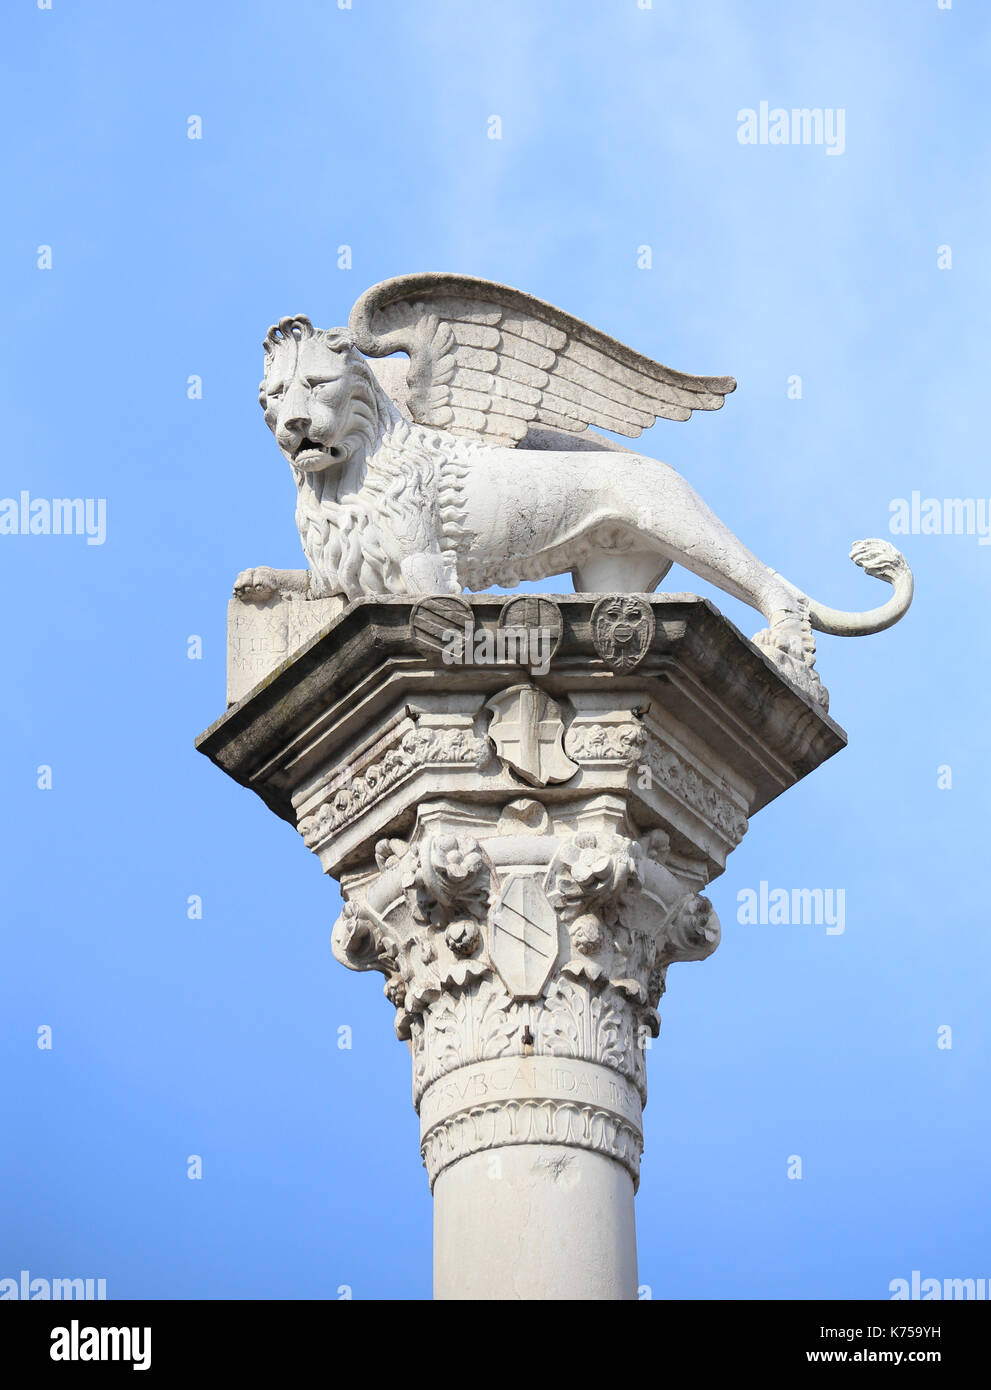 column with the lion winged symbol of the Serenissima Repubblica that means Serene Republic of Venice in Italy Stock Photo